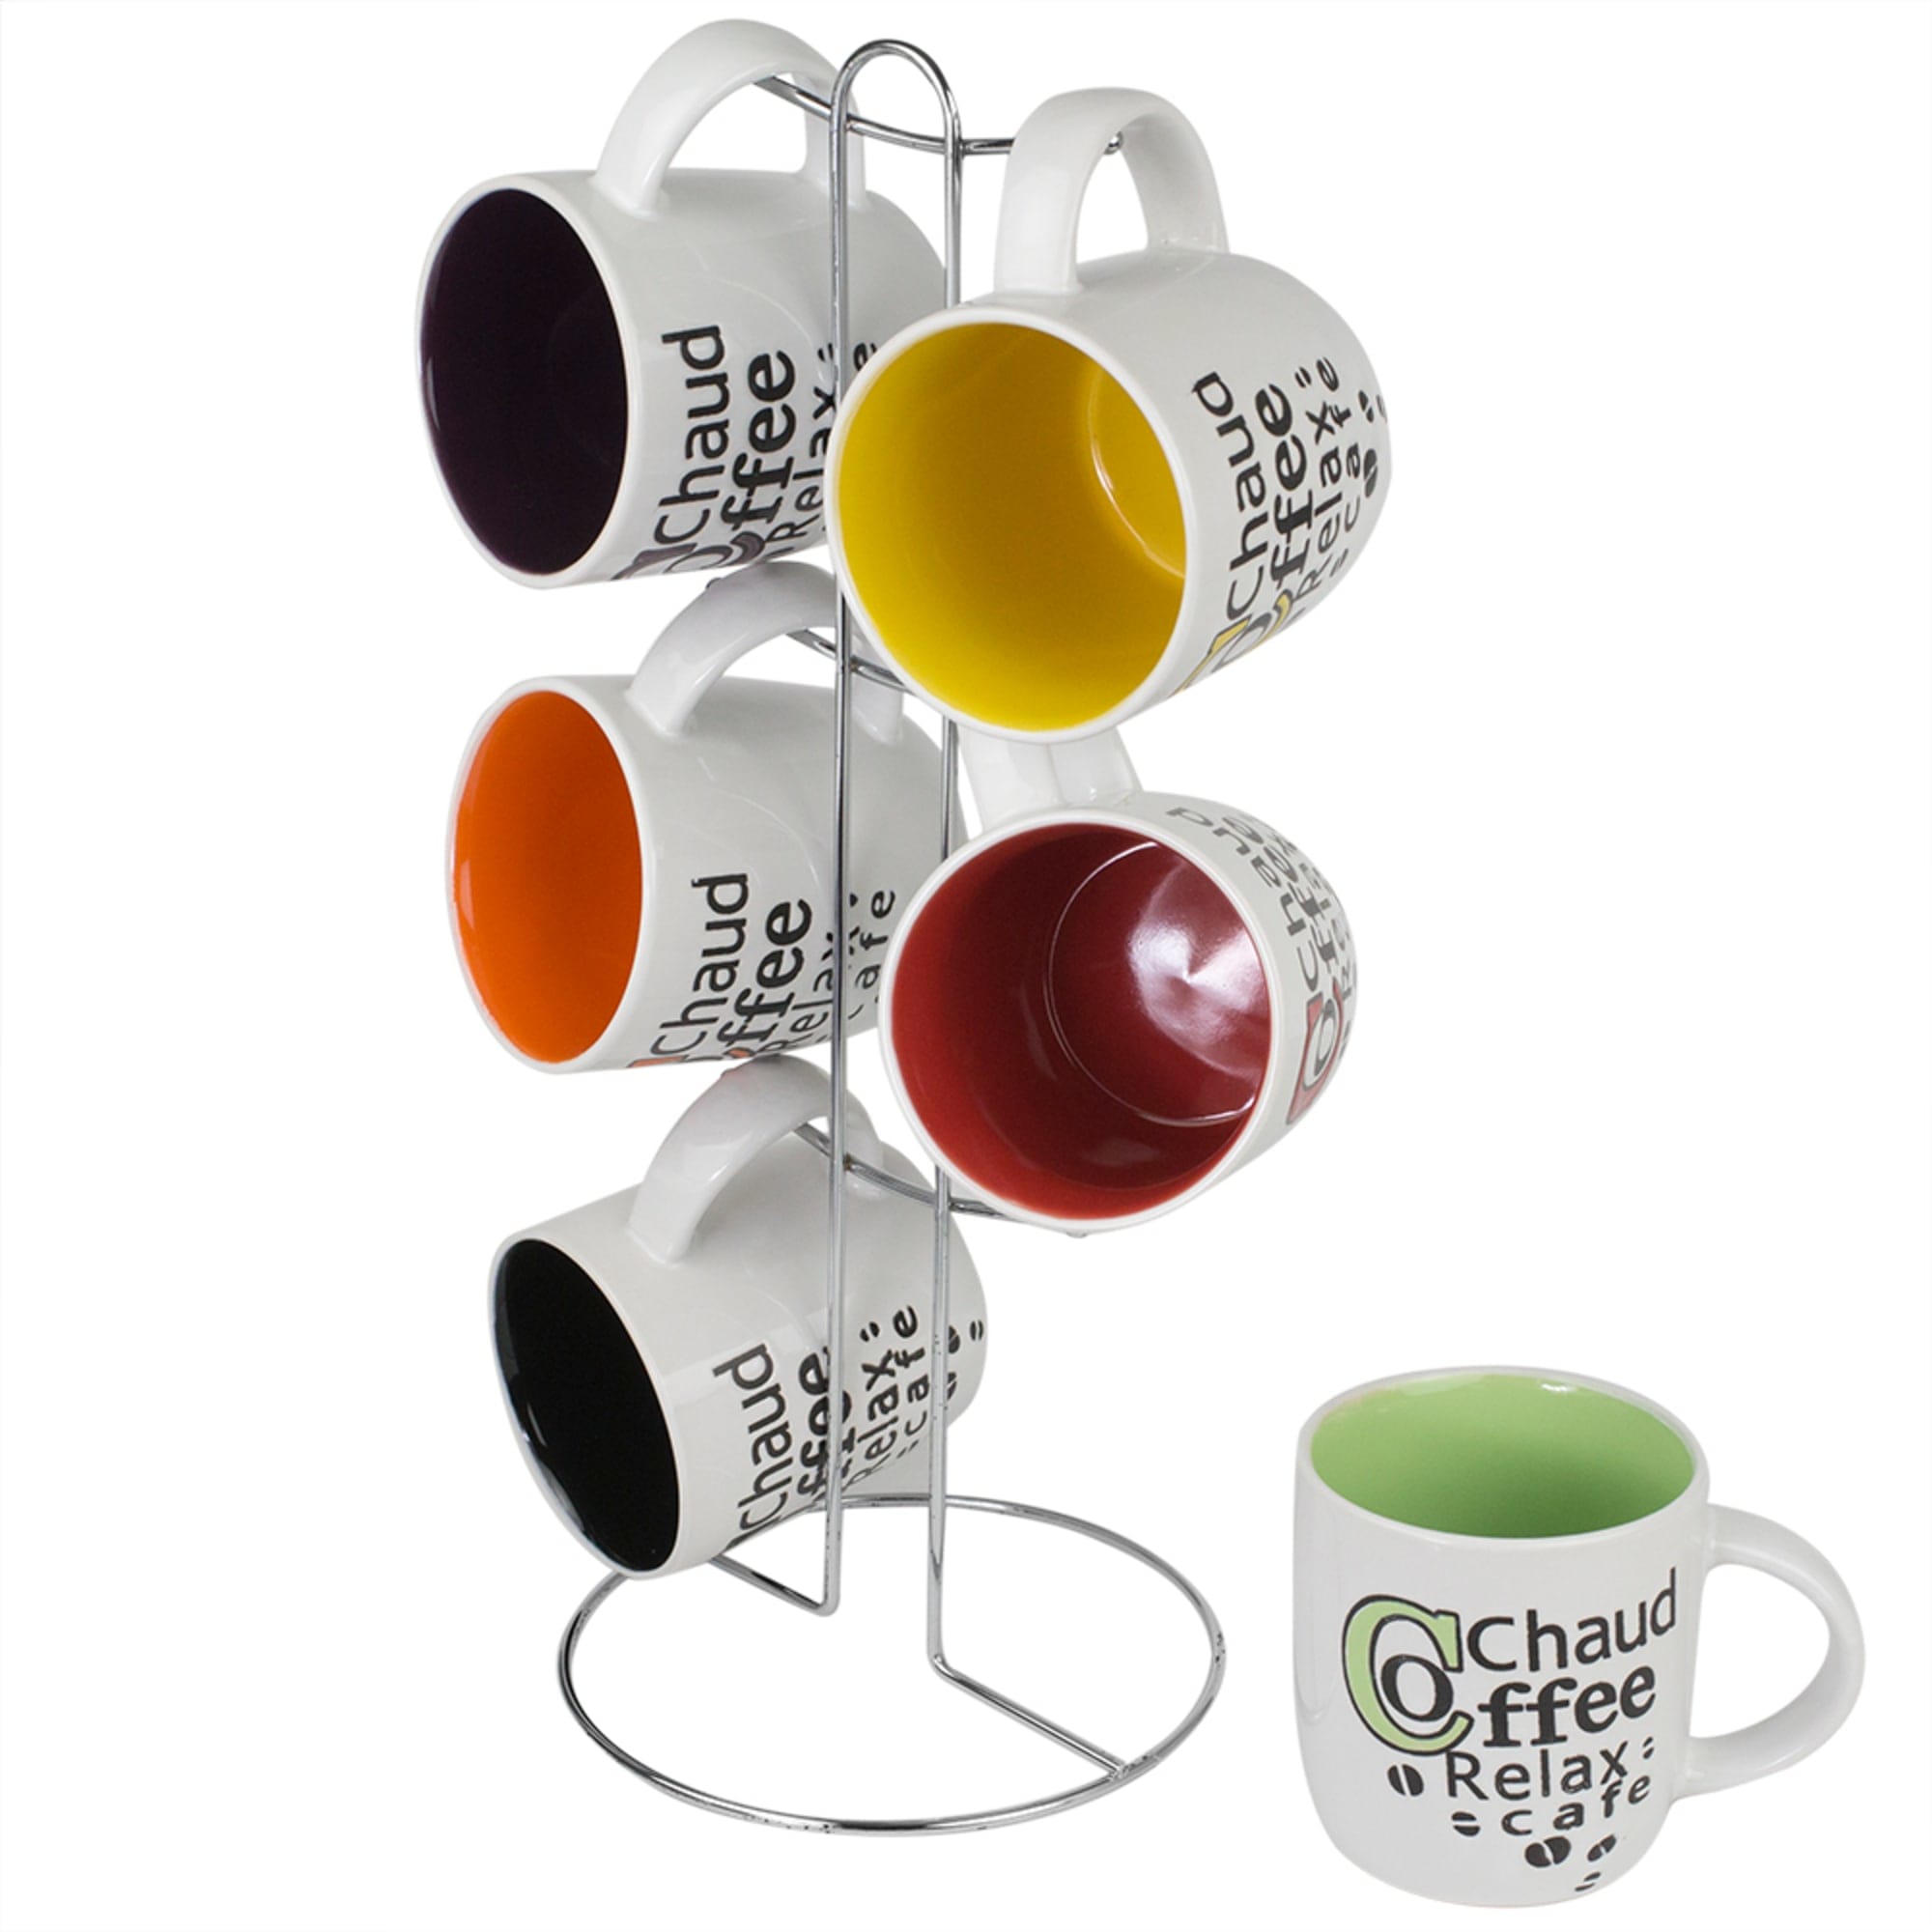 Home Basics 6 Piece Mug Set with Stand $10.00 EACH, CASE PACK OF 6